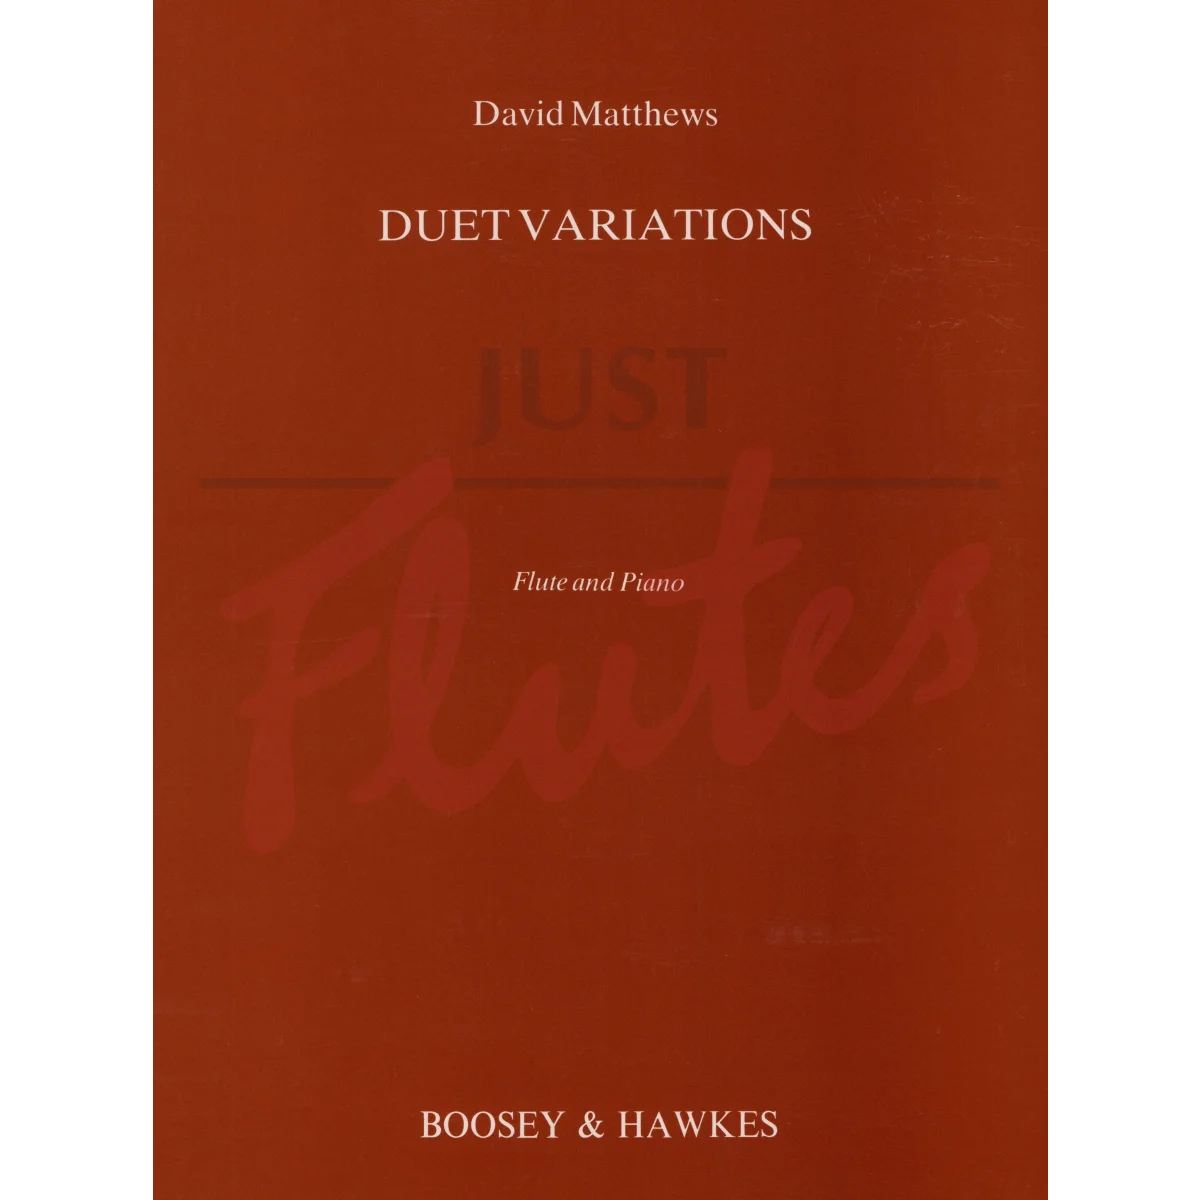 Duet Variations for Flute and Piano